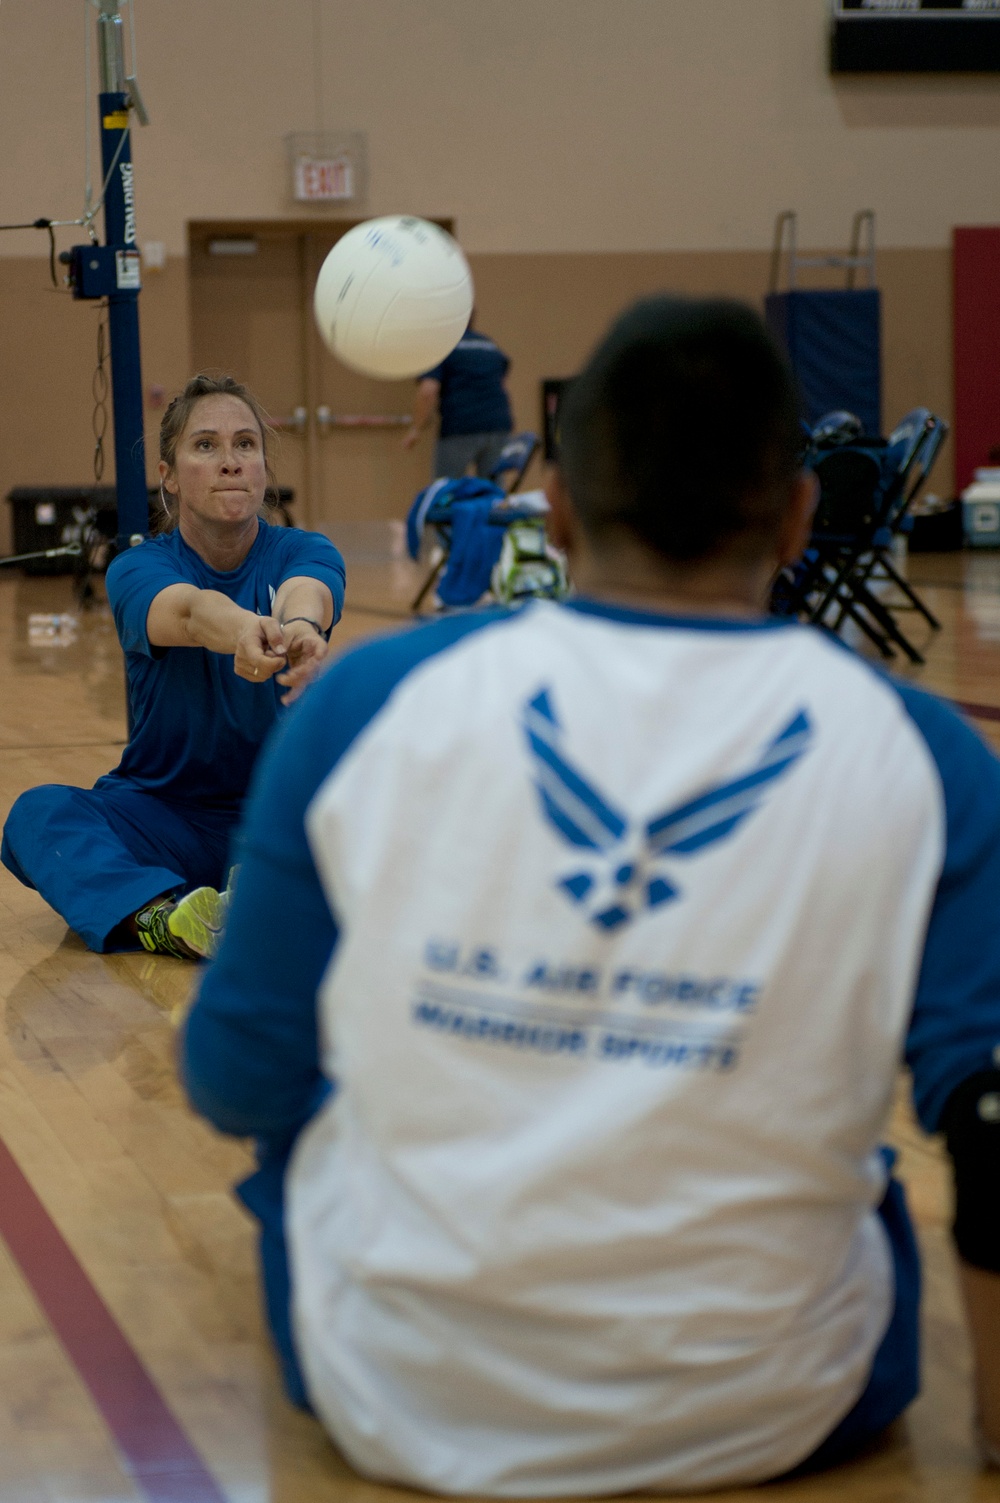 AF Wounded Warrior Trials in full swing at Nellis